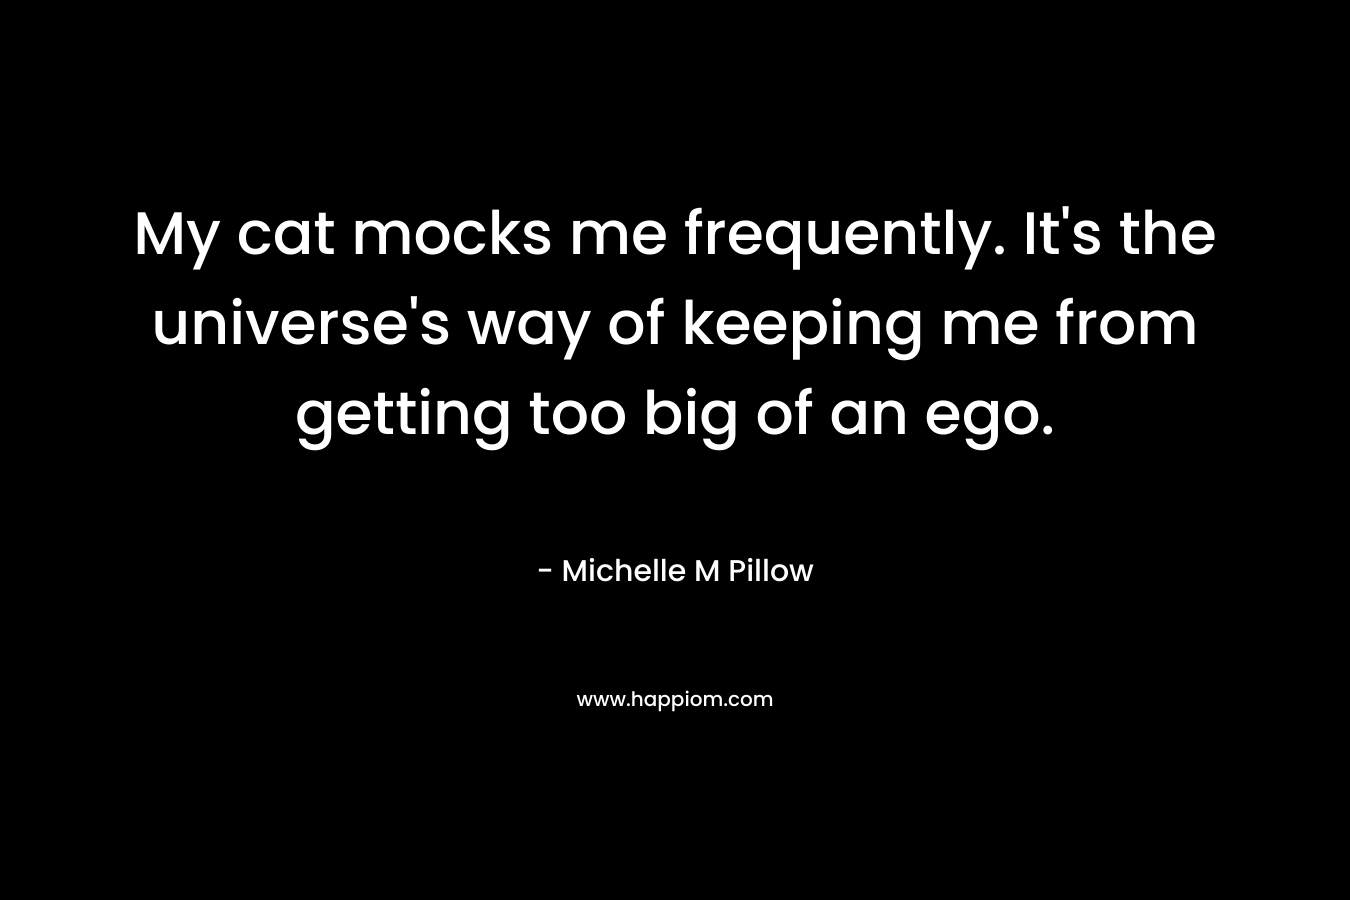 My cat mocks me frequently. It's the universe's way of keeping me from getting too big of an ego.